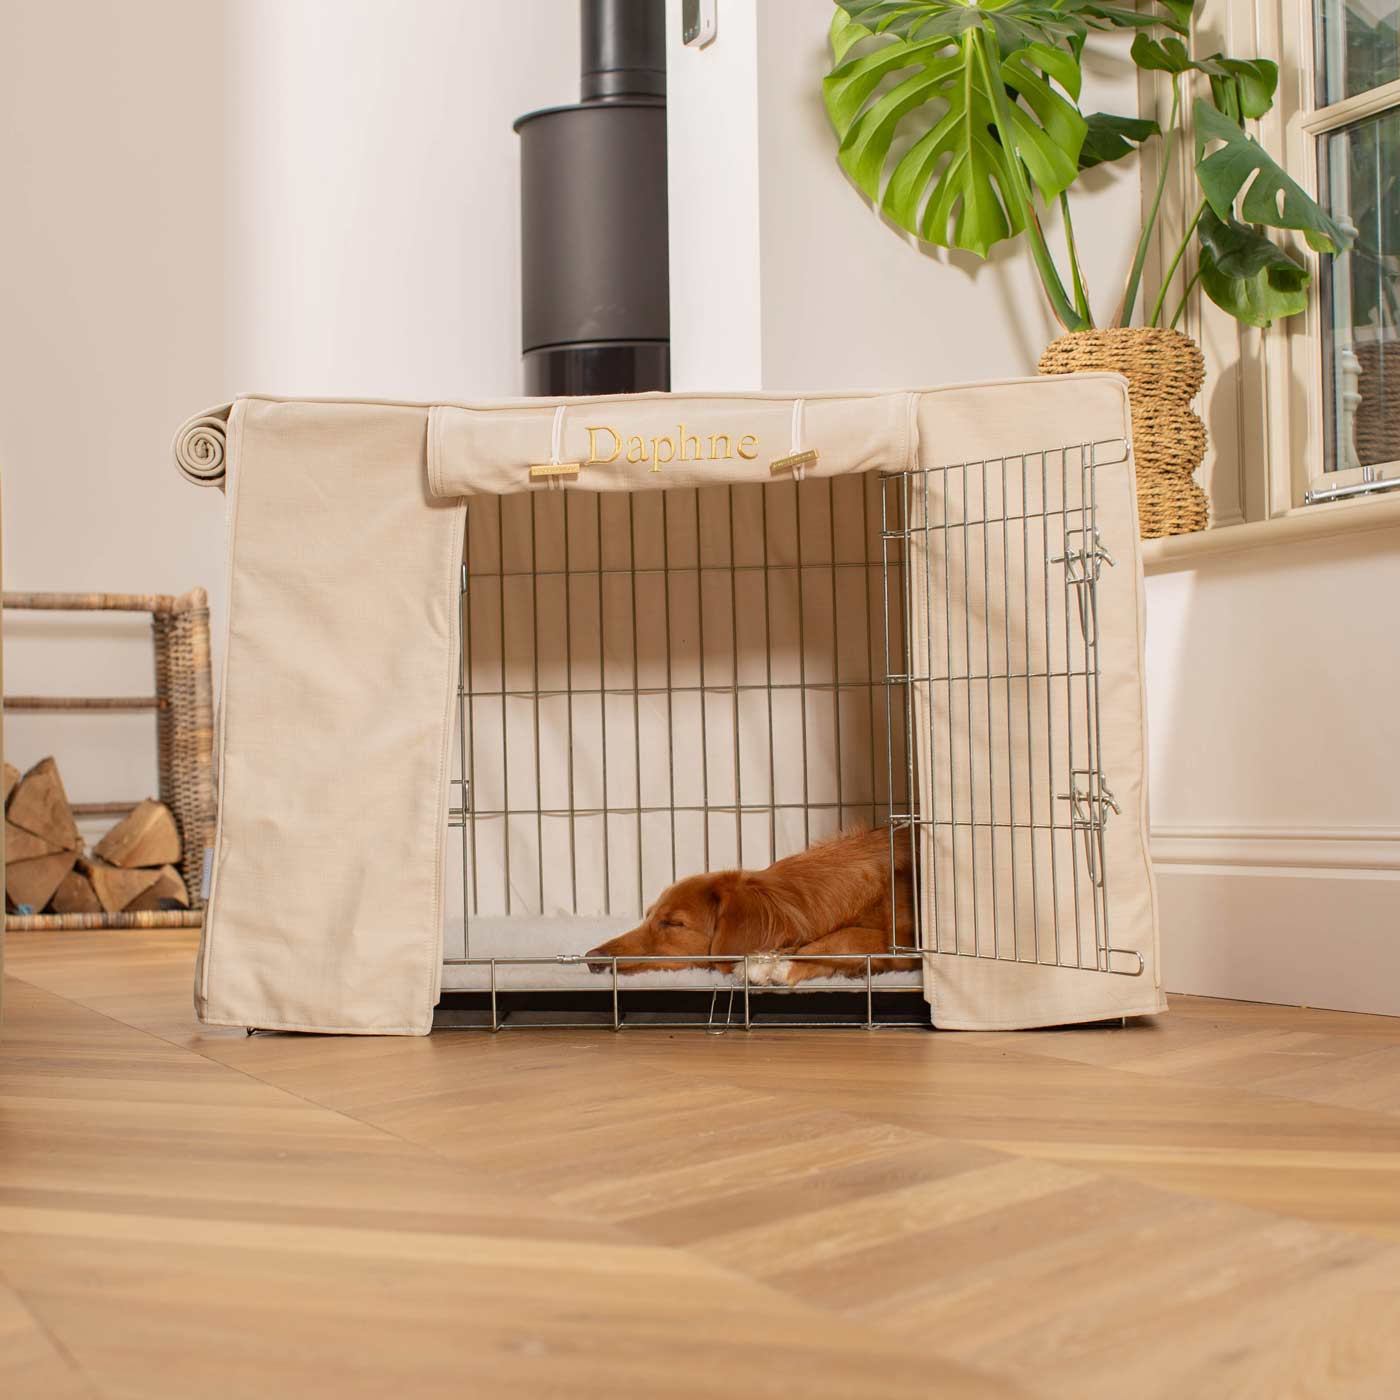 Luxury Dog Cage Cover, Savanna Bone Cage Cover The Perfect Dog Cage Accessory, Available To Personalize Now at Lords & Labradors US